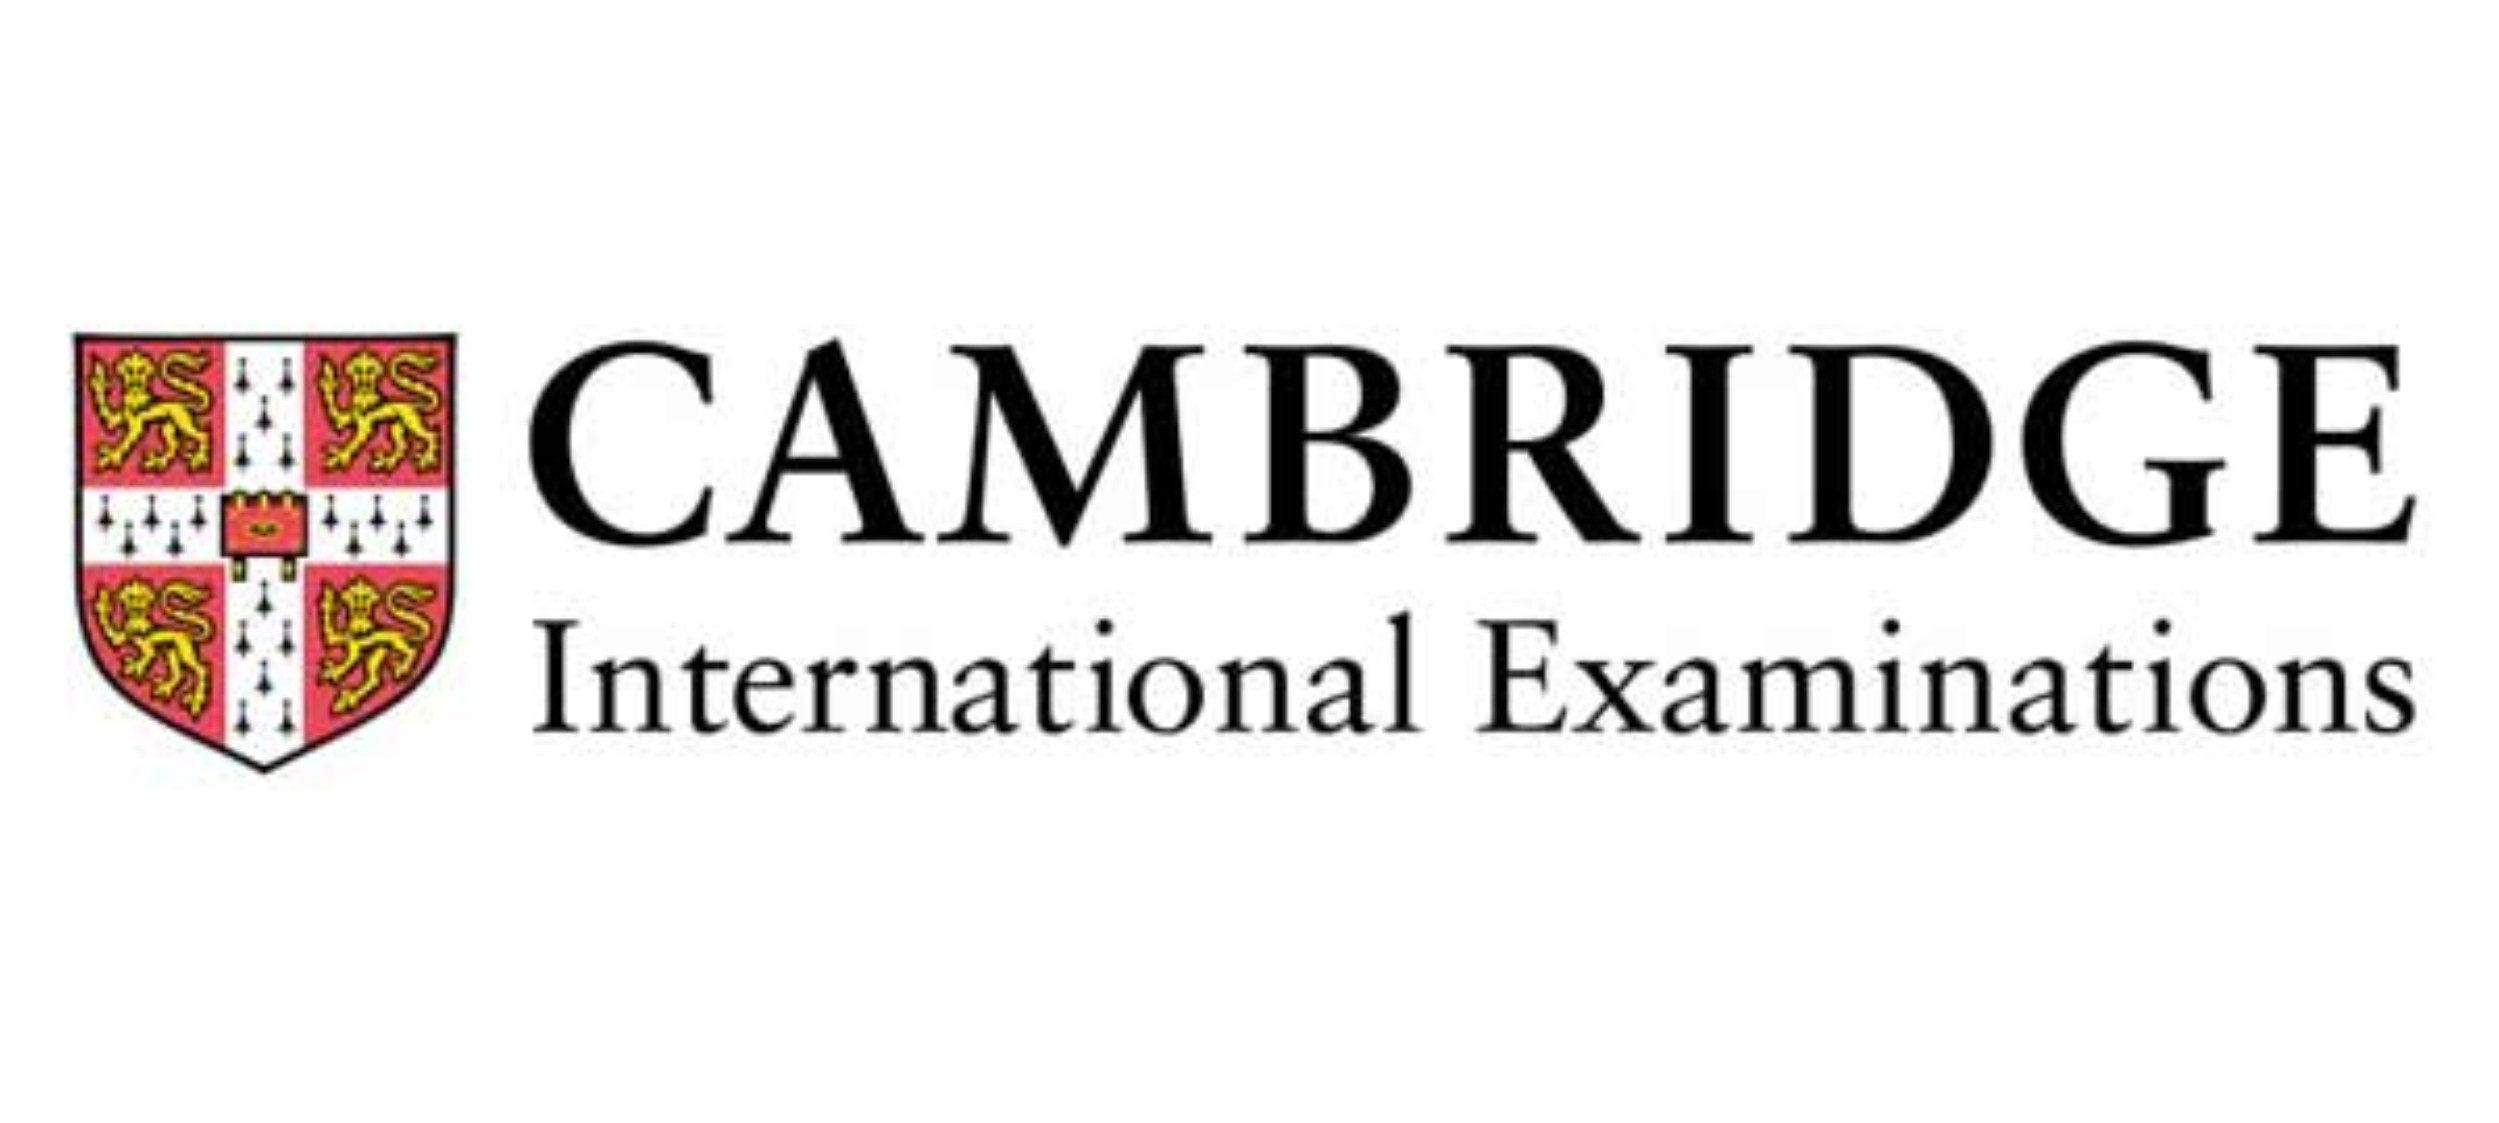 Cambridge International Examinations: 139 Nigeria Students Receive Awards For Outstanding Results-marketingspace.com.ng